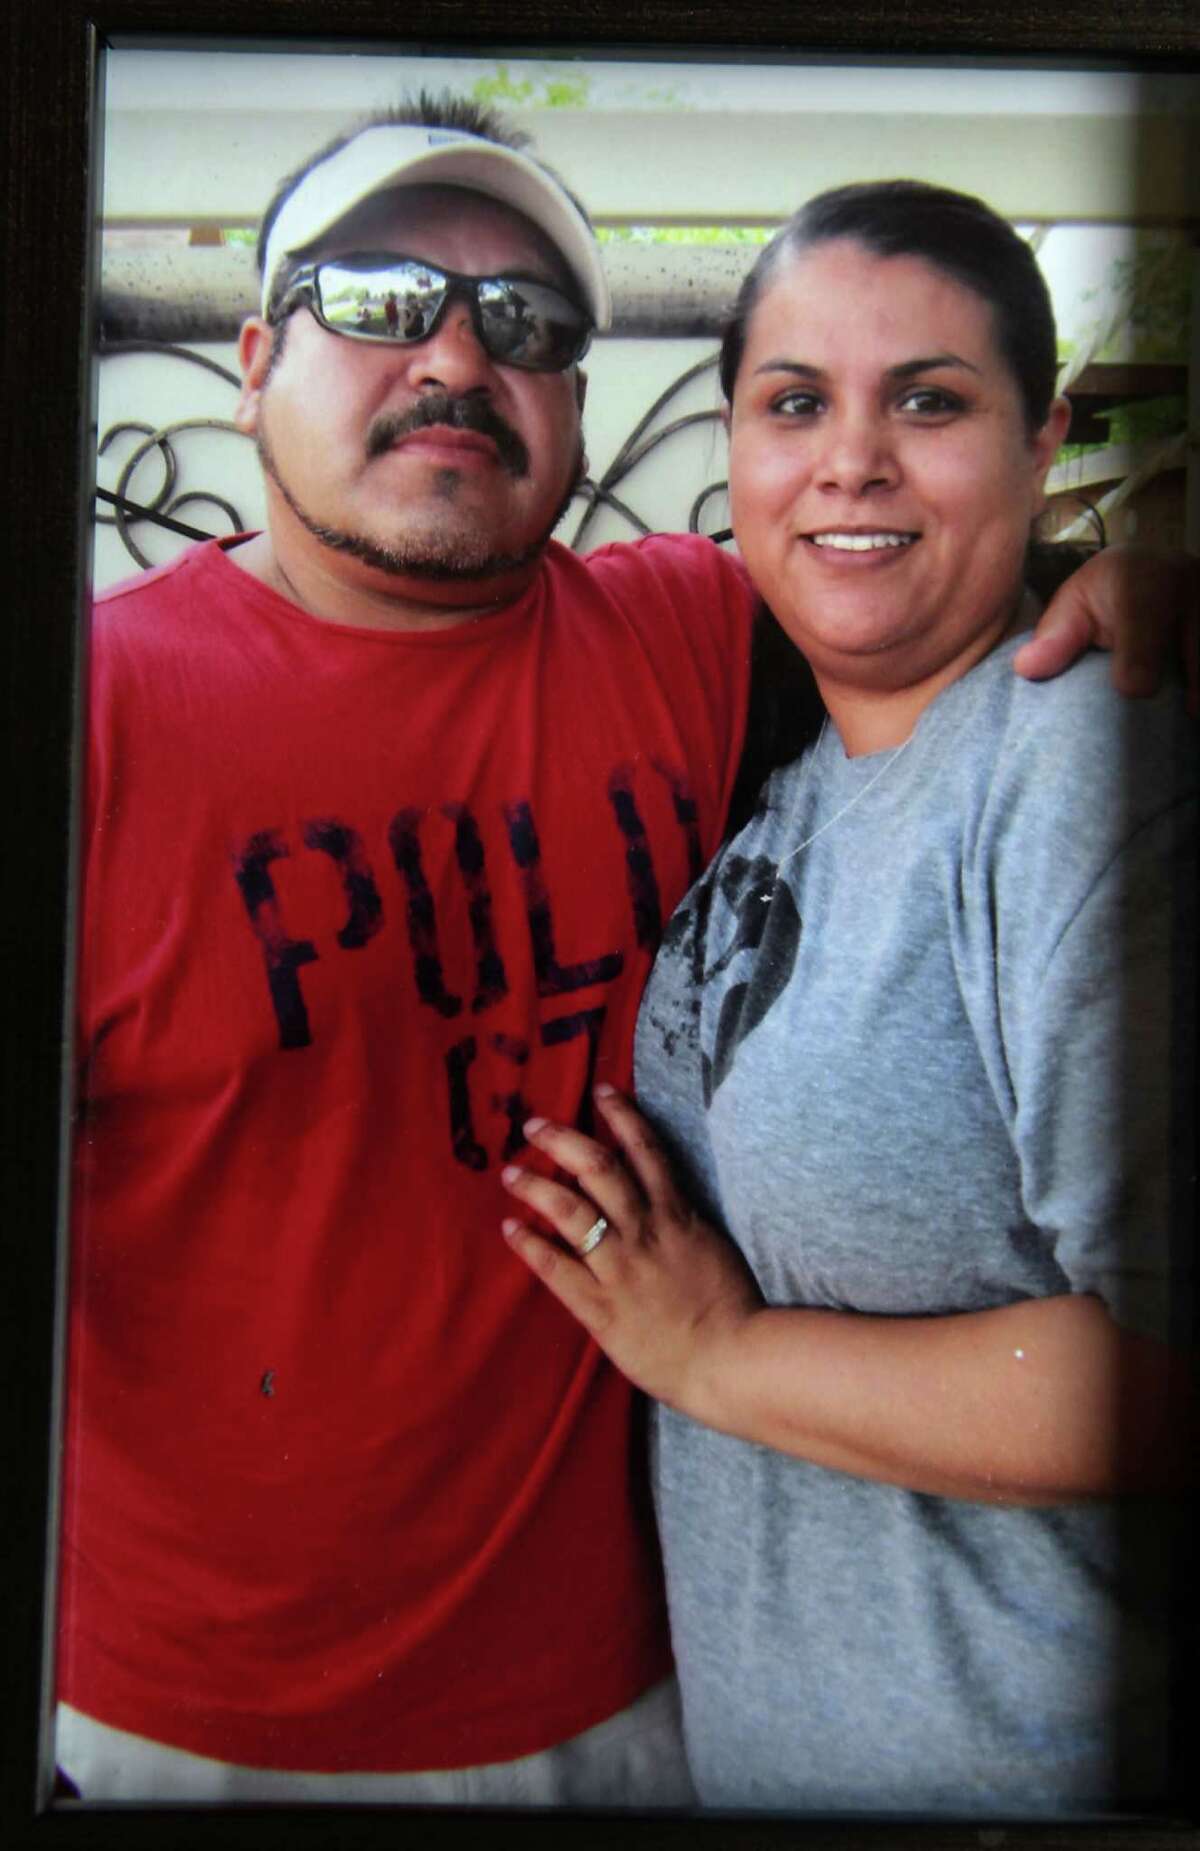 Tina Saiz and her husband, Felipe Saiz, who was killed in a drilling rig accident last year, were childhood sweethearts and had three children together.